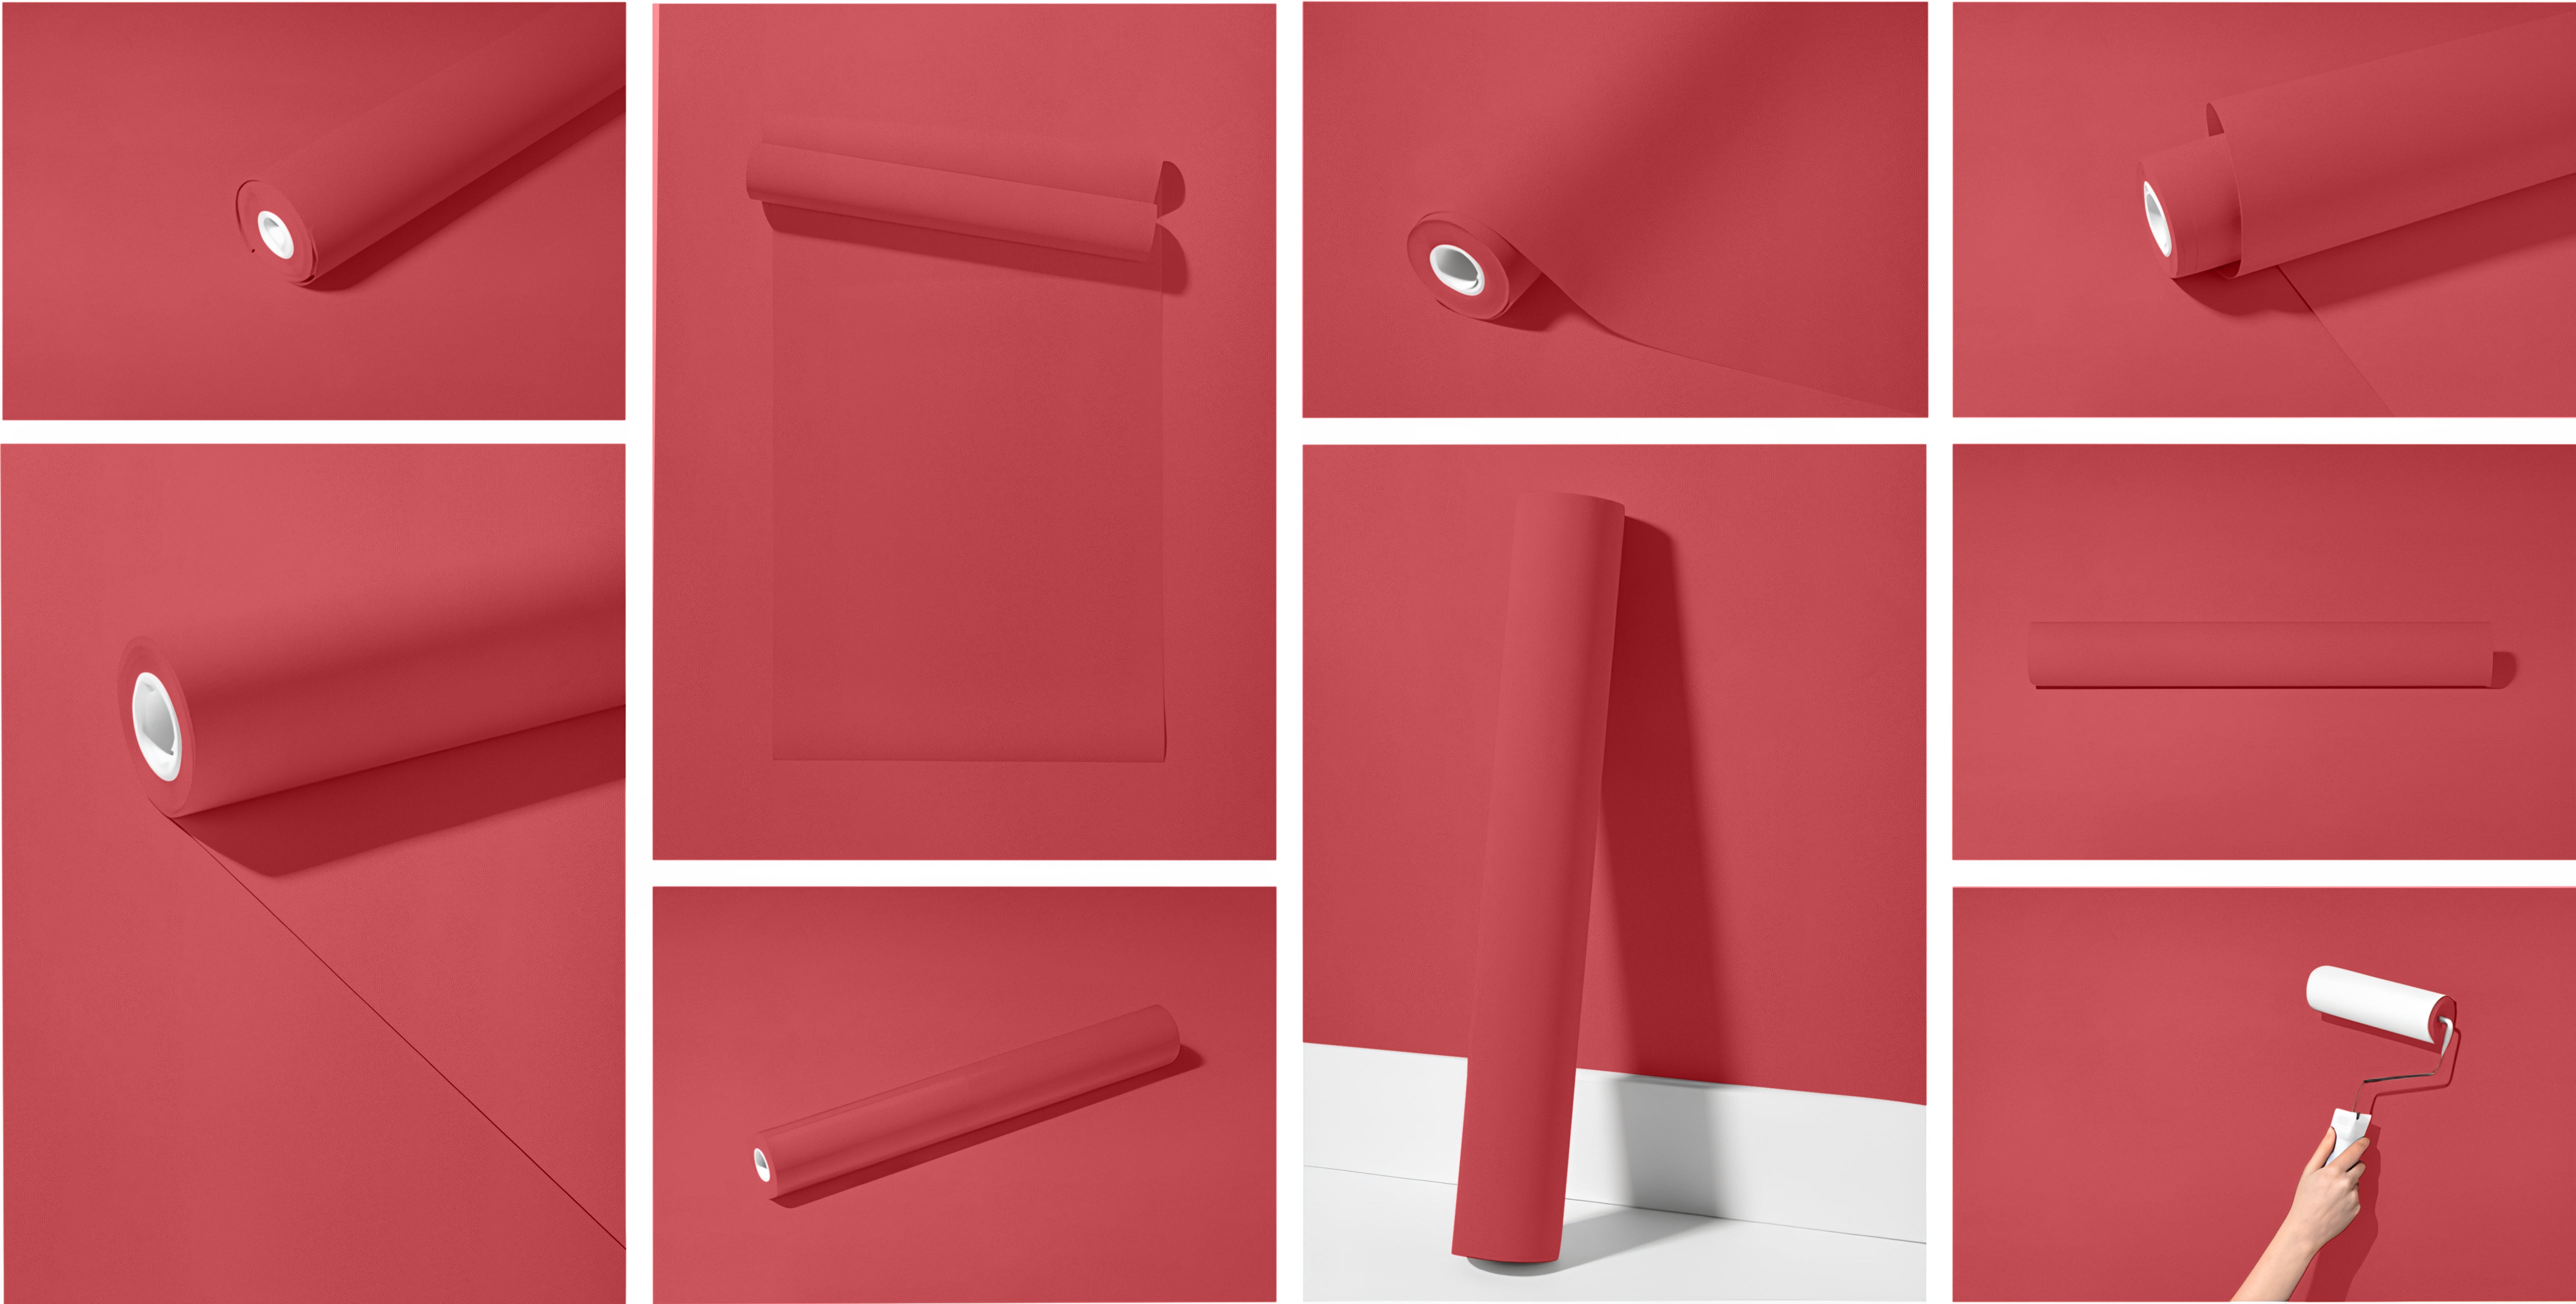 Peel & Stick Removable Re-usable Paint - Color RAL 3017 Rose - offRAL™ - RALRAW LLC, USA